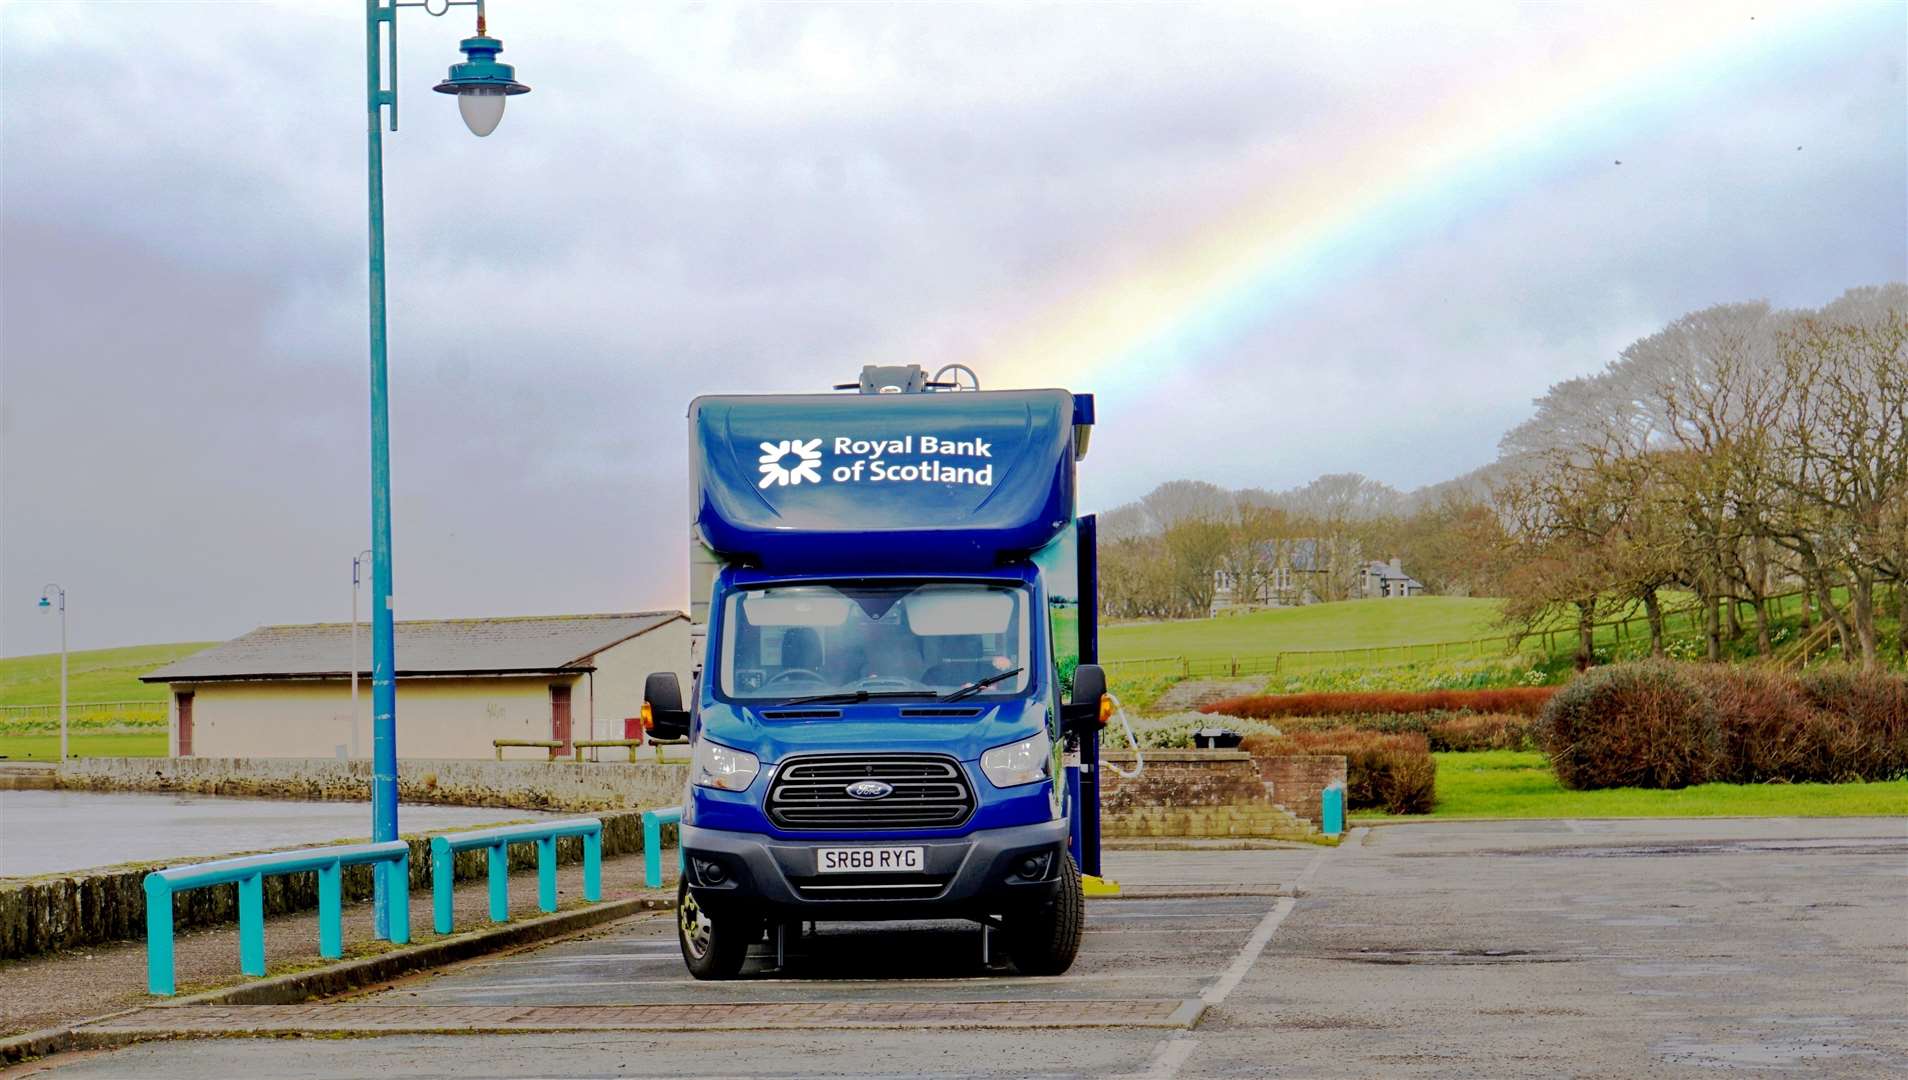 "There's a pot of gold at the end of every rainbow" is the old saying. This shot taken last week of the RBS mobile bank in Wick shows there might be some truth to the myth.